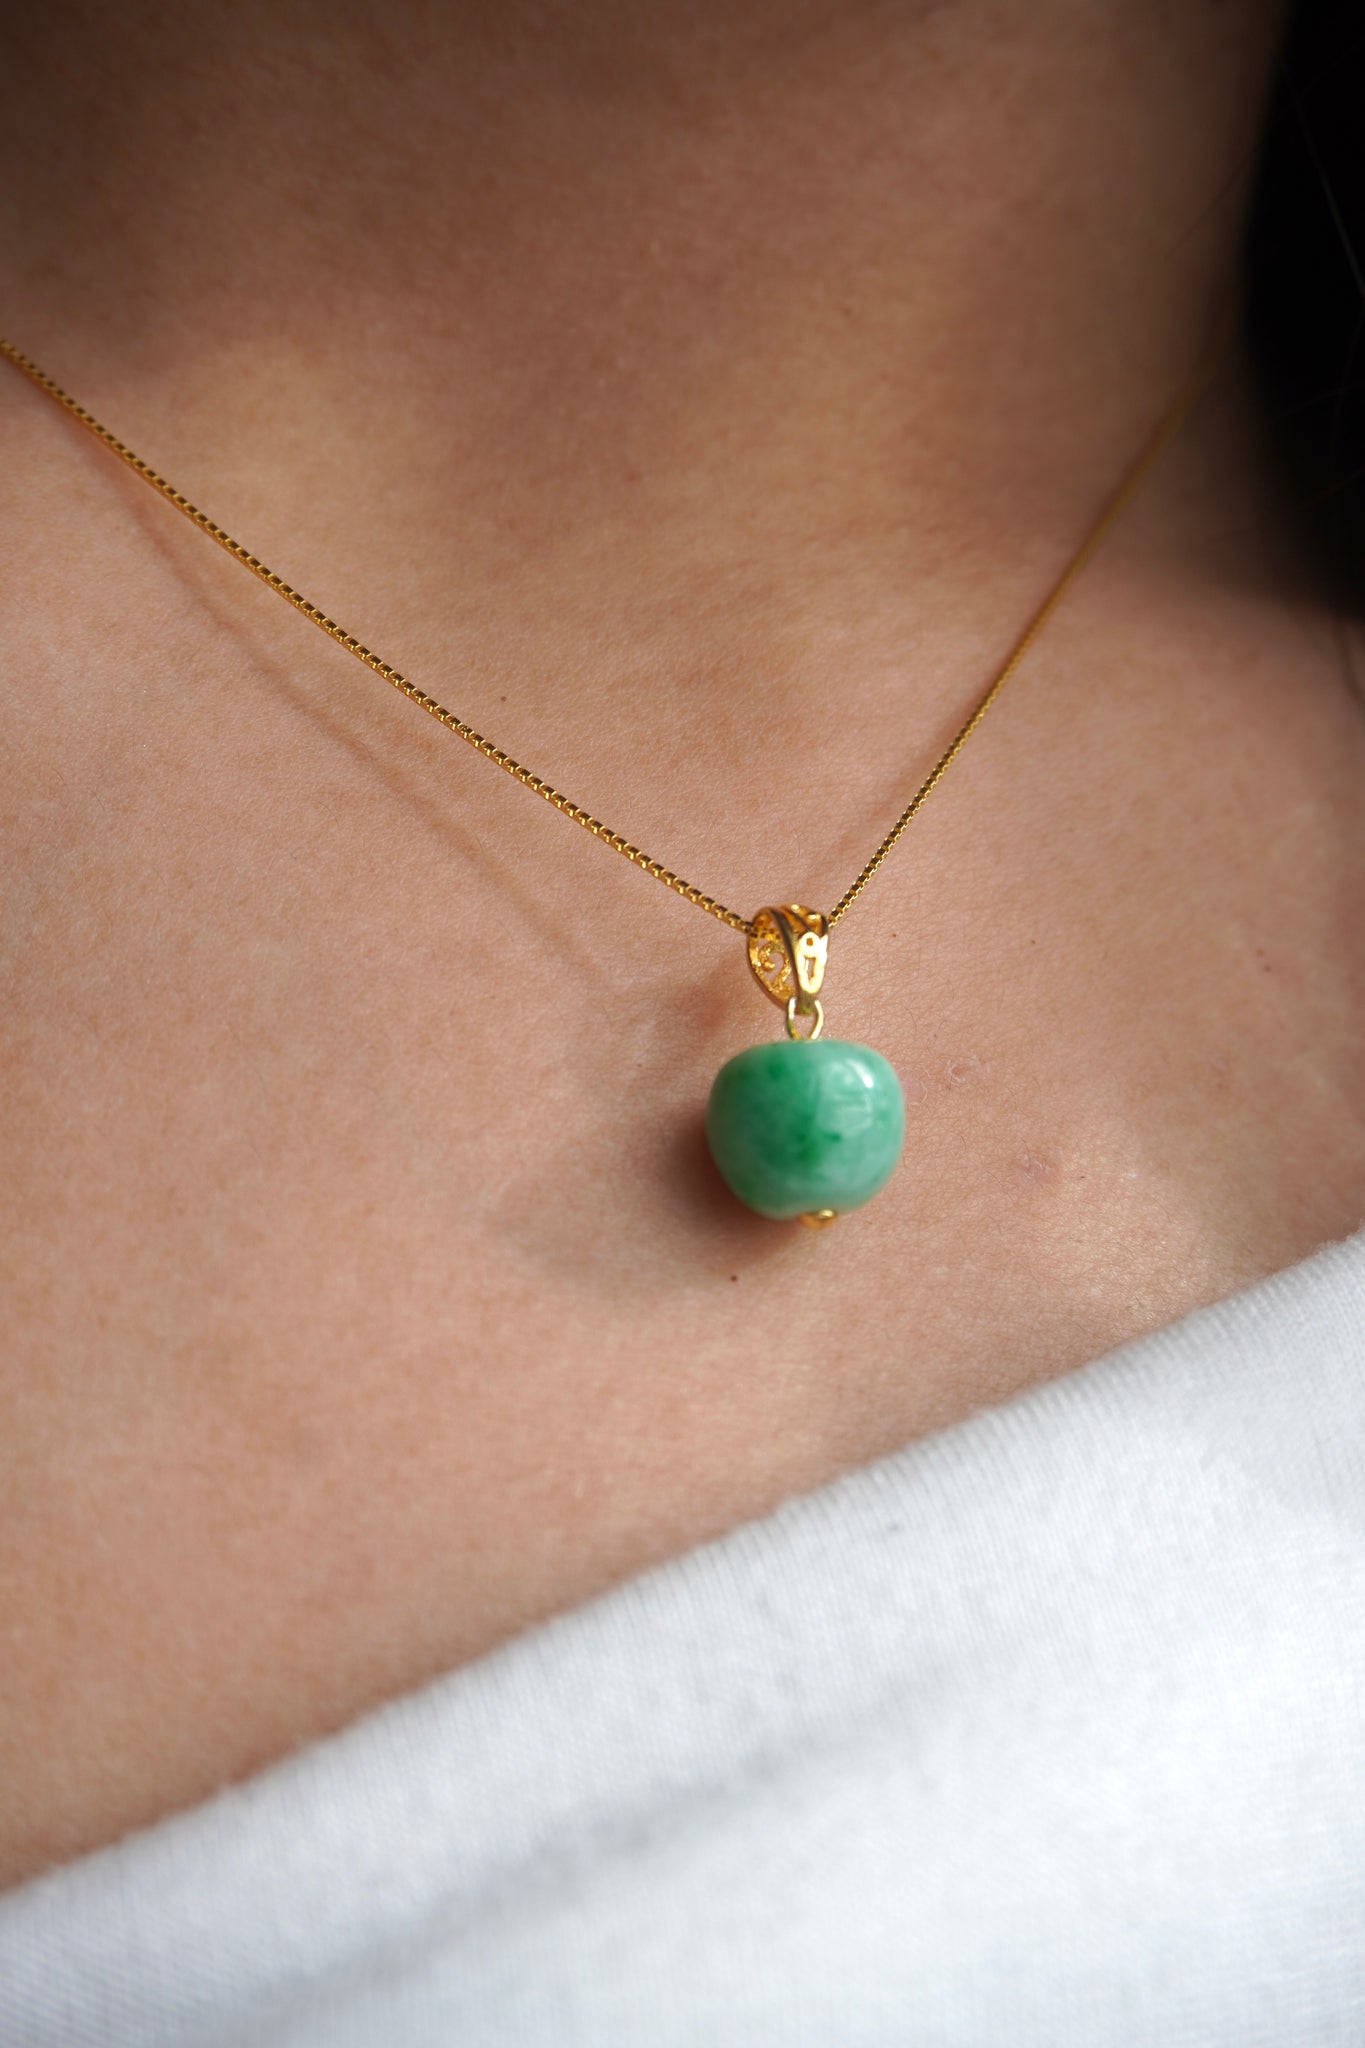 The Apple Jade Necklace